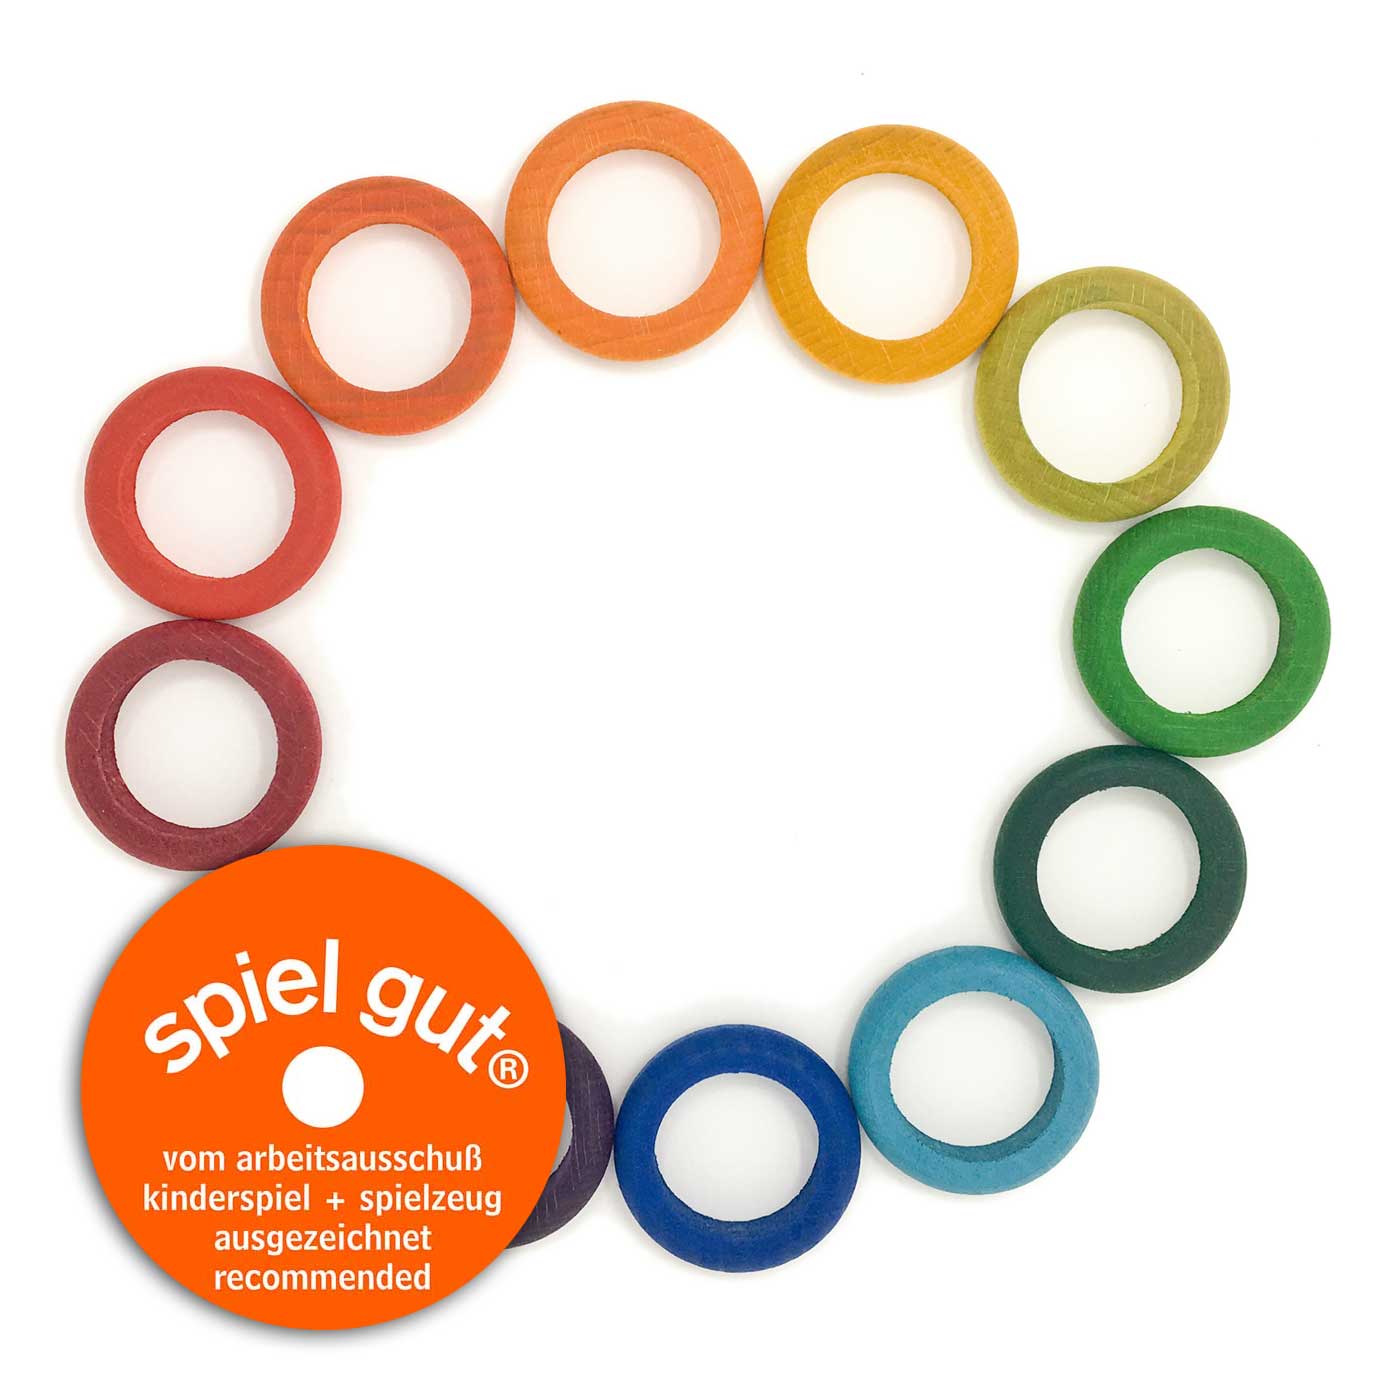 12 wooden rings in a circle, each one color of the rainbow from red to violet.